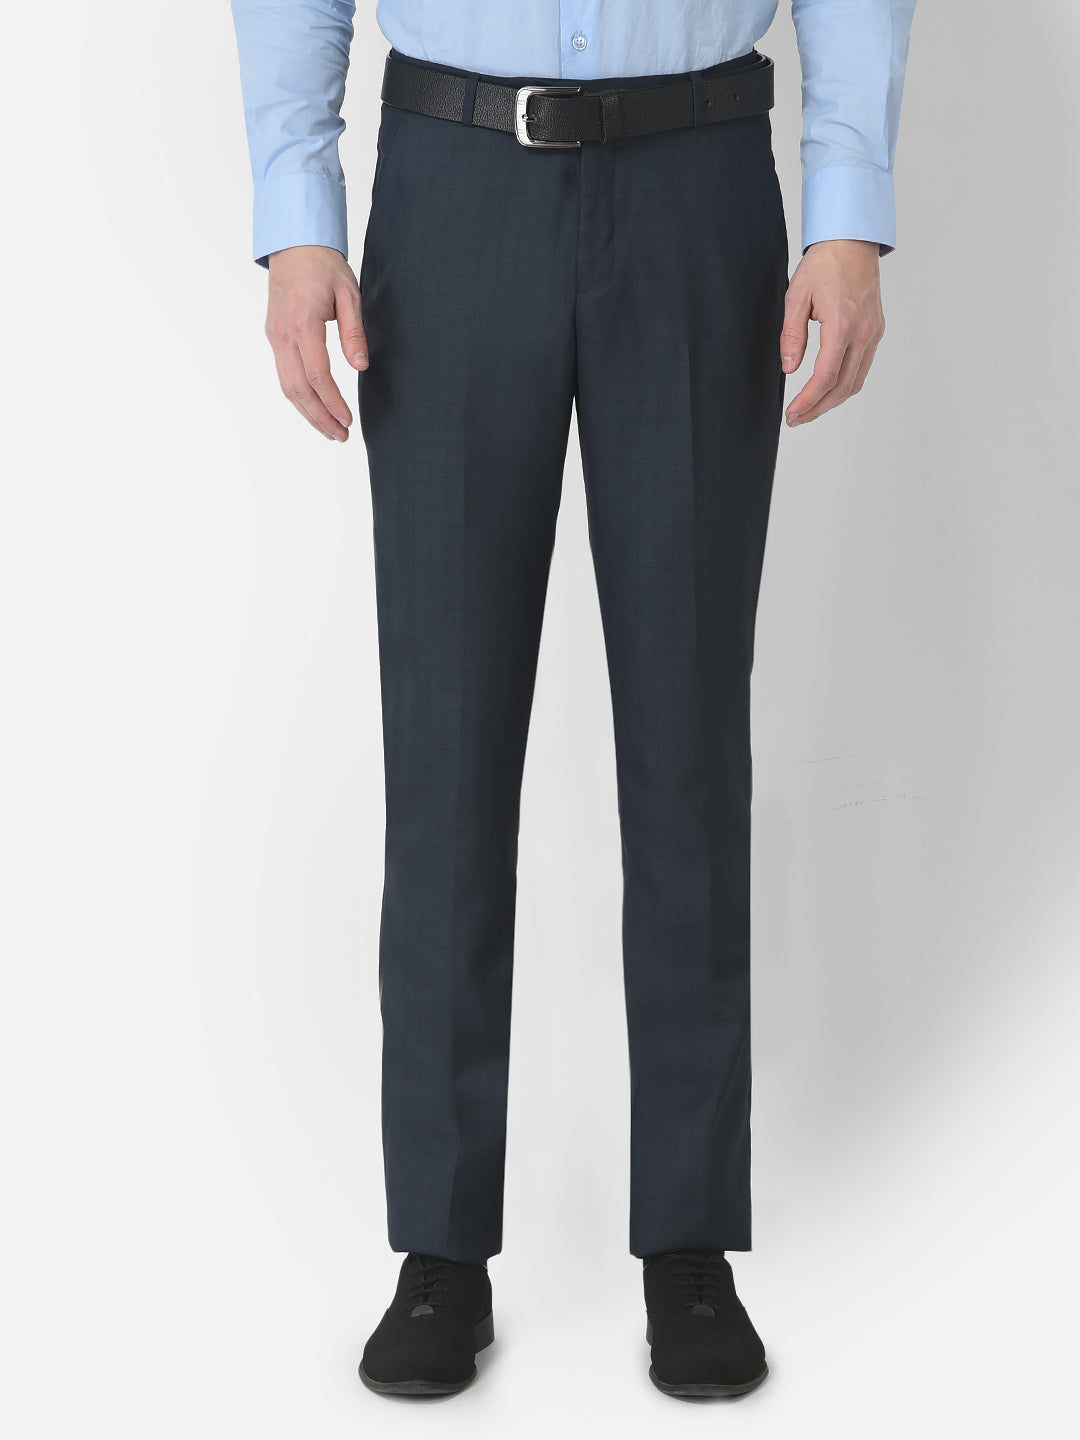 Ultra Slim Fit Trousers  Buy Ultra Slim Fit Trousers online in India